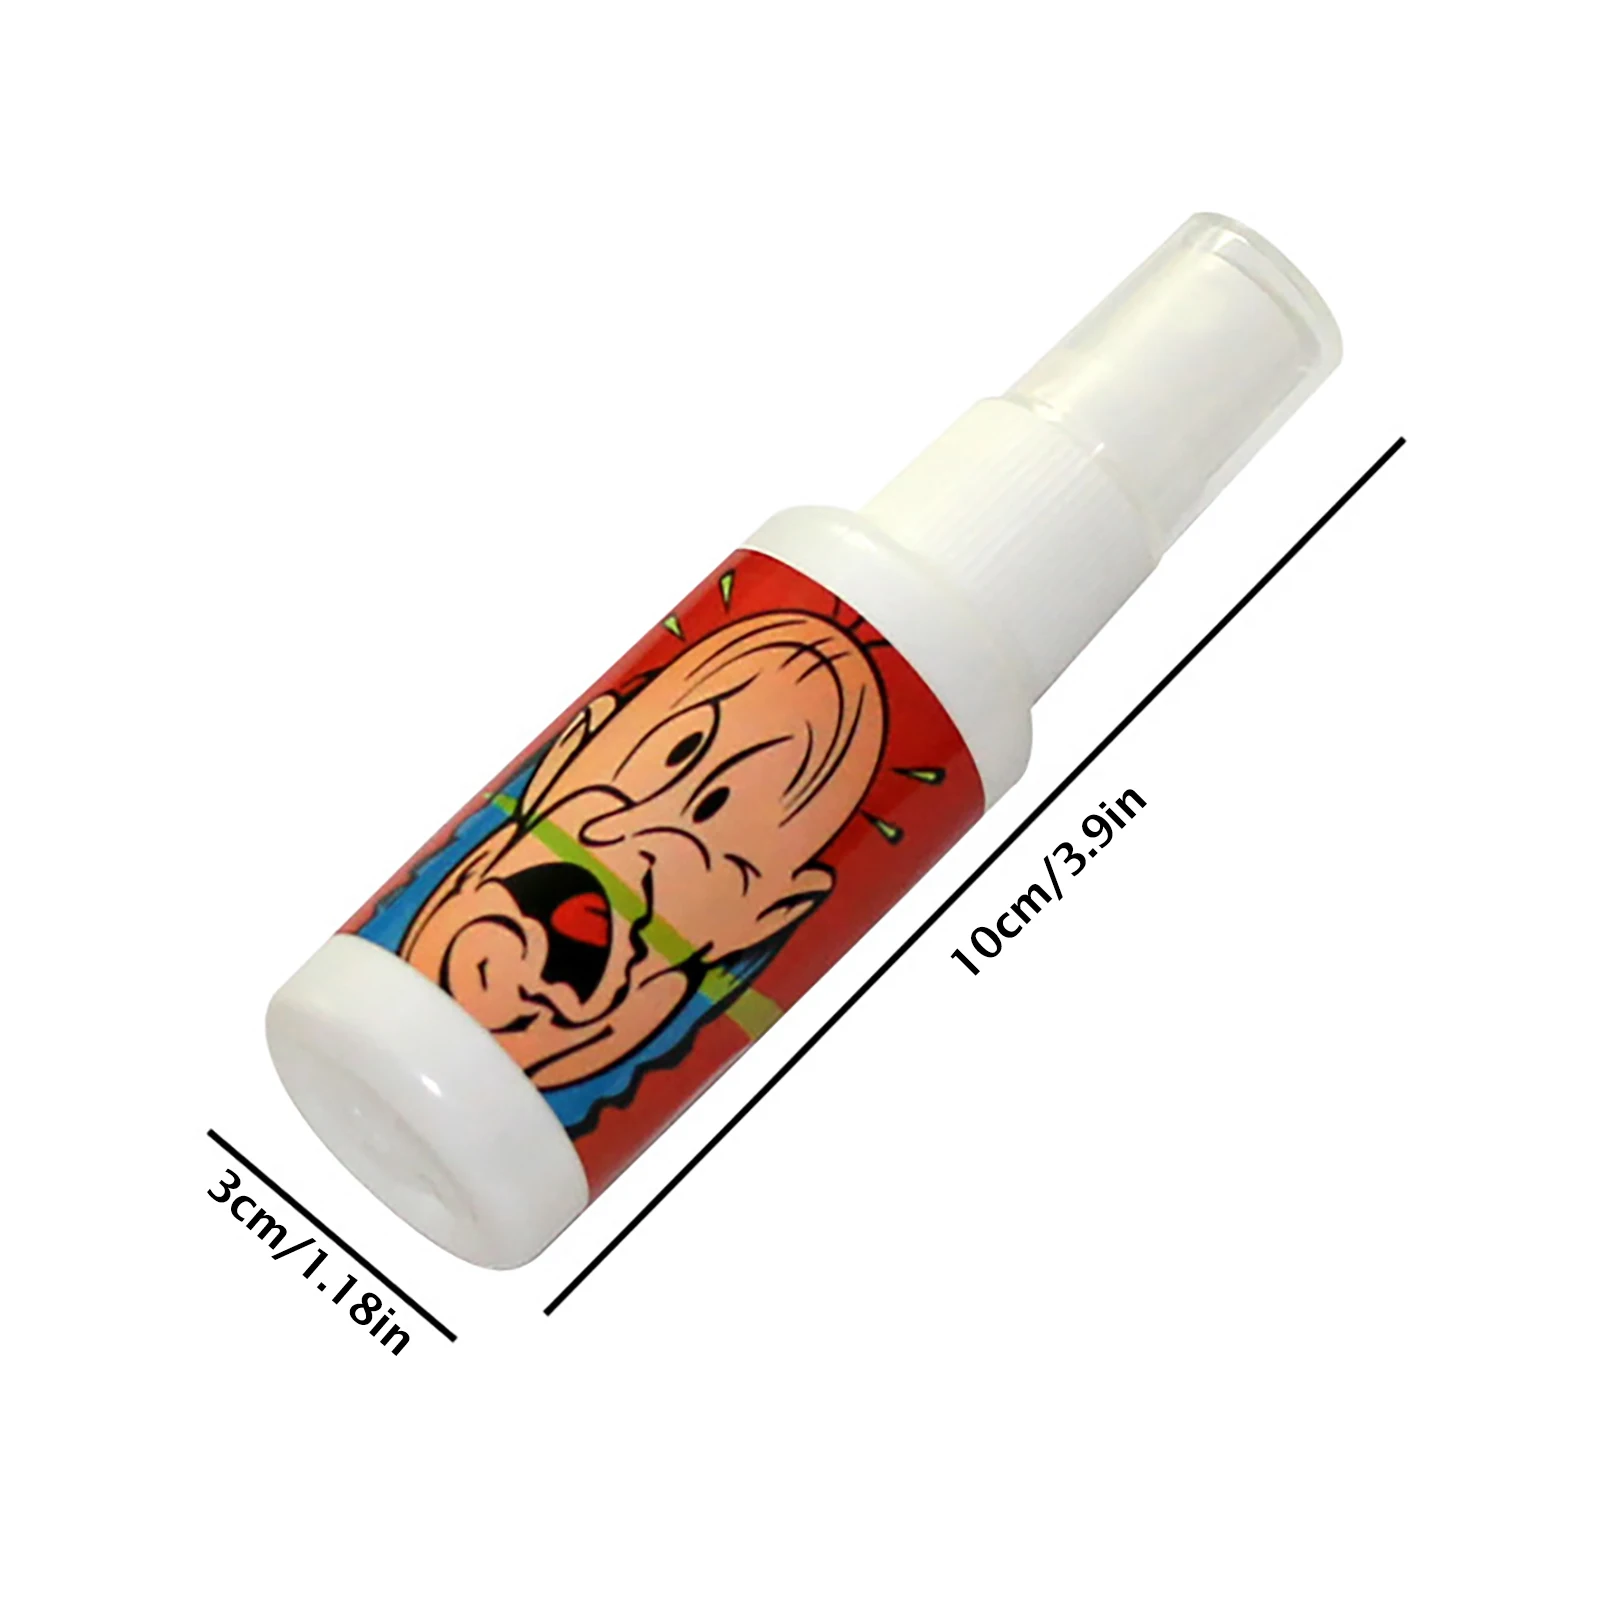 Liquid Fart Tricky Easy To Use Liquid Stinky Fart Prank Sprays Highly Concentrated Extra Strong Fart Spray Toy Safe To Use images - 6